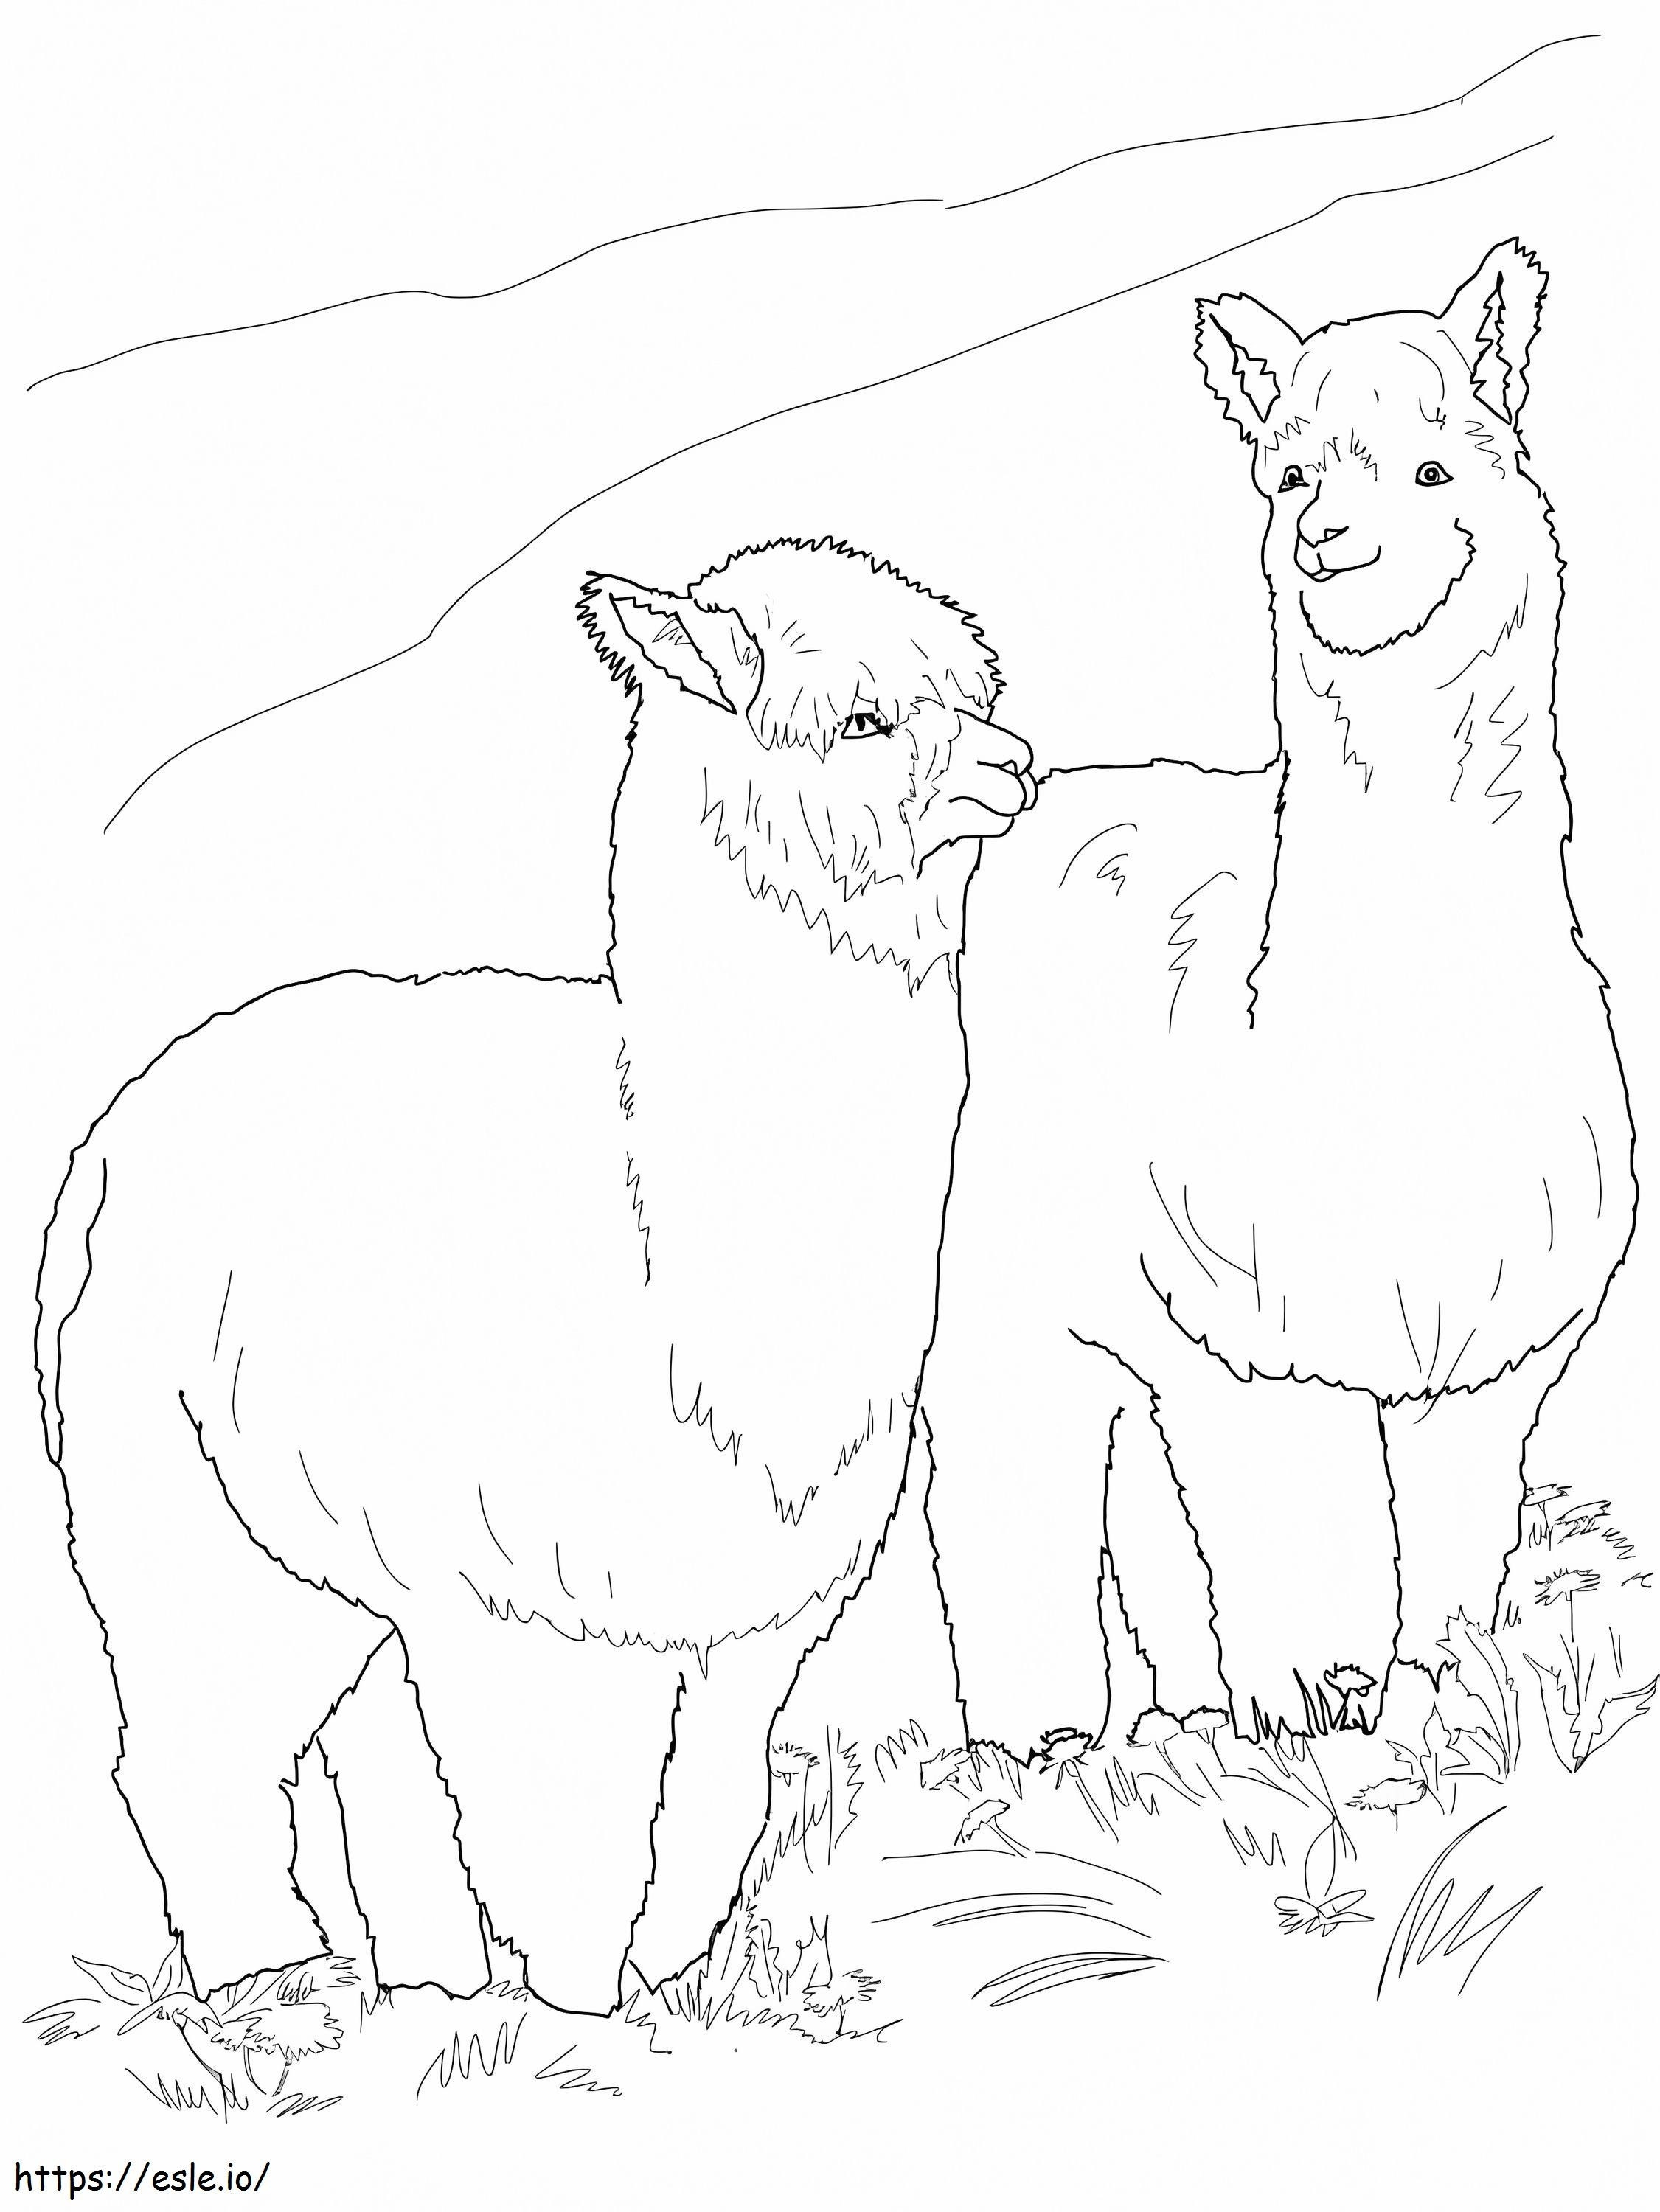 Two Hairy Alpacas coloring page